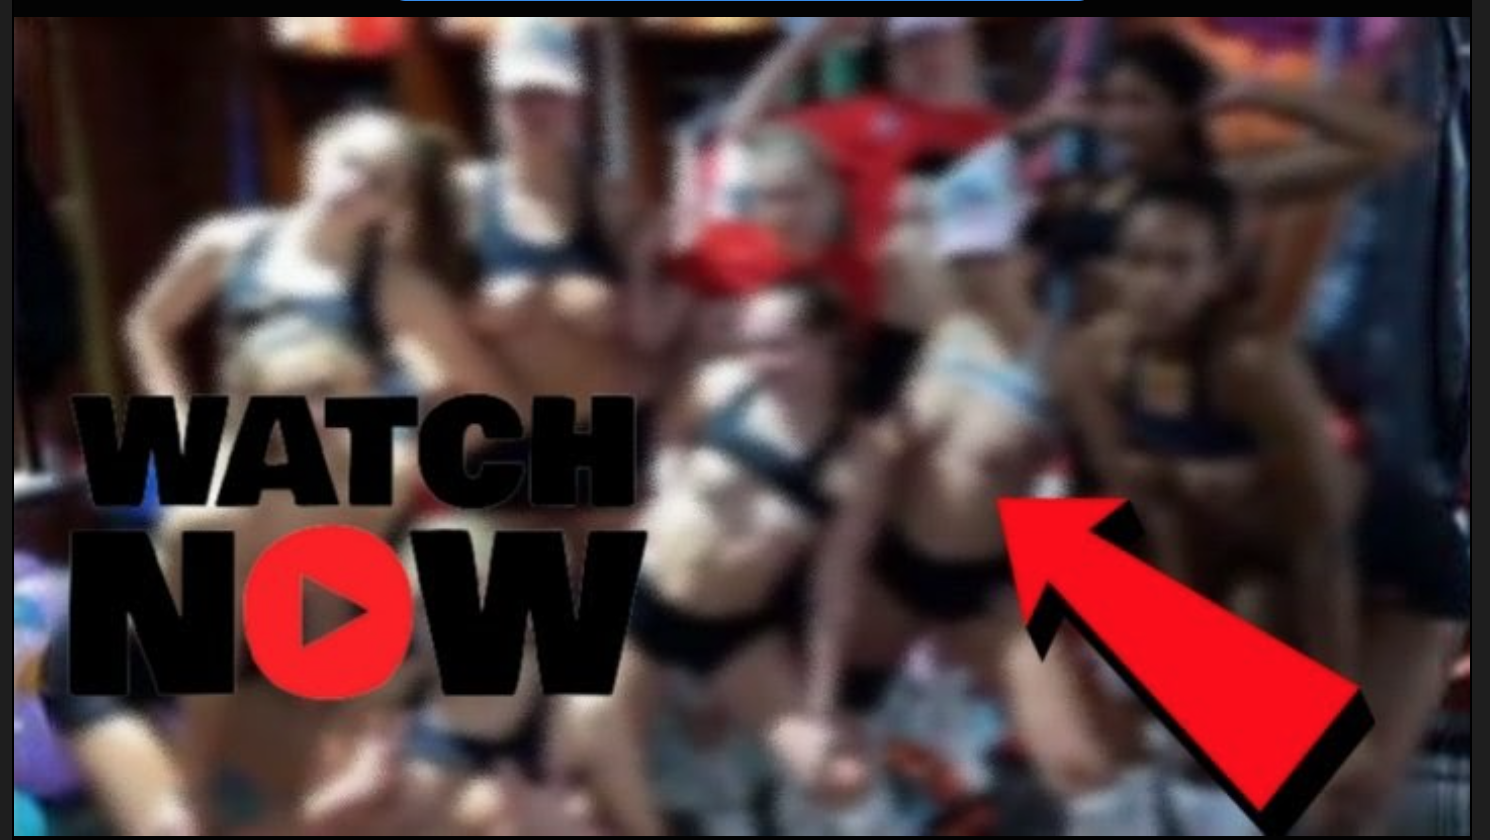 Wisconsin volleyball team leaked video porn